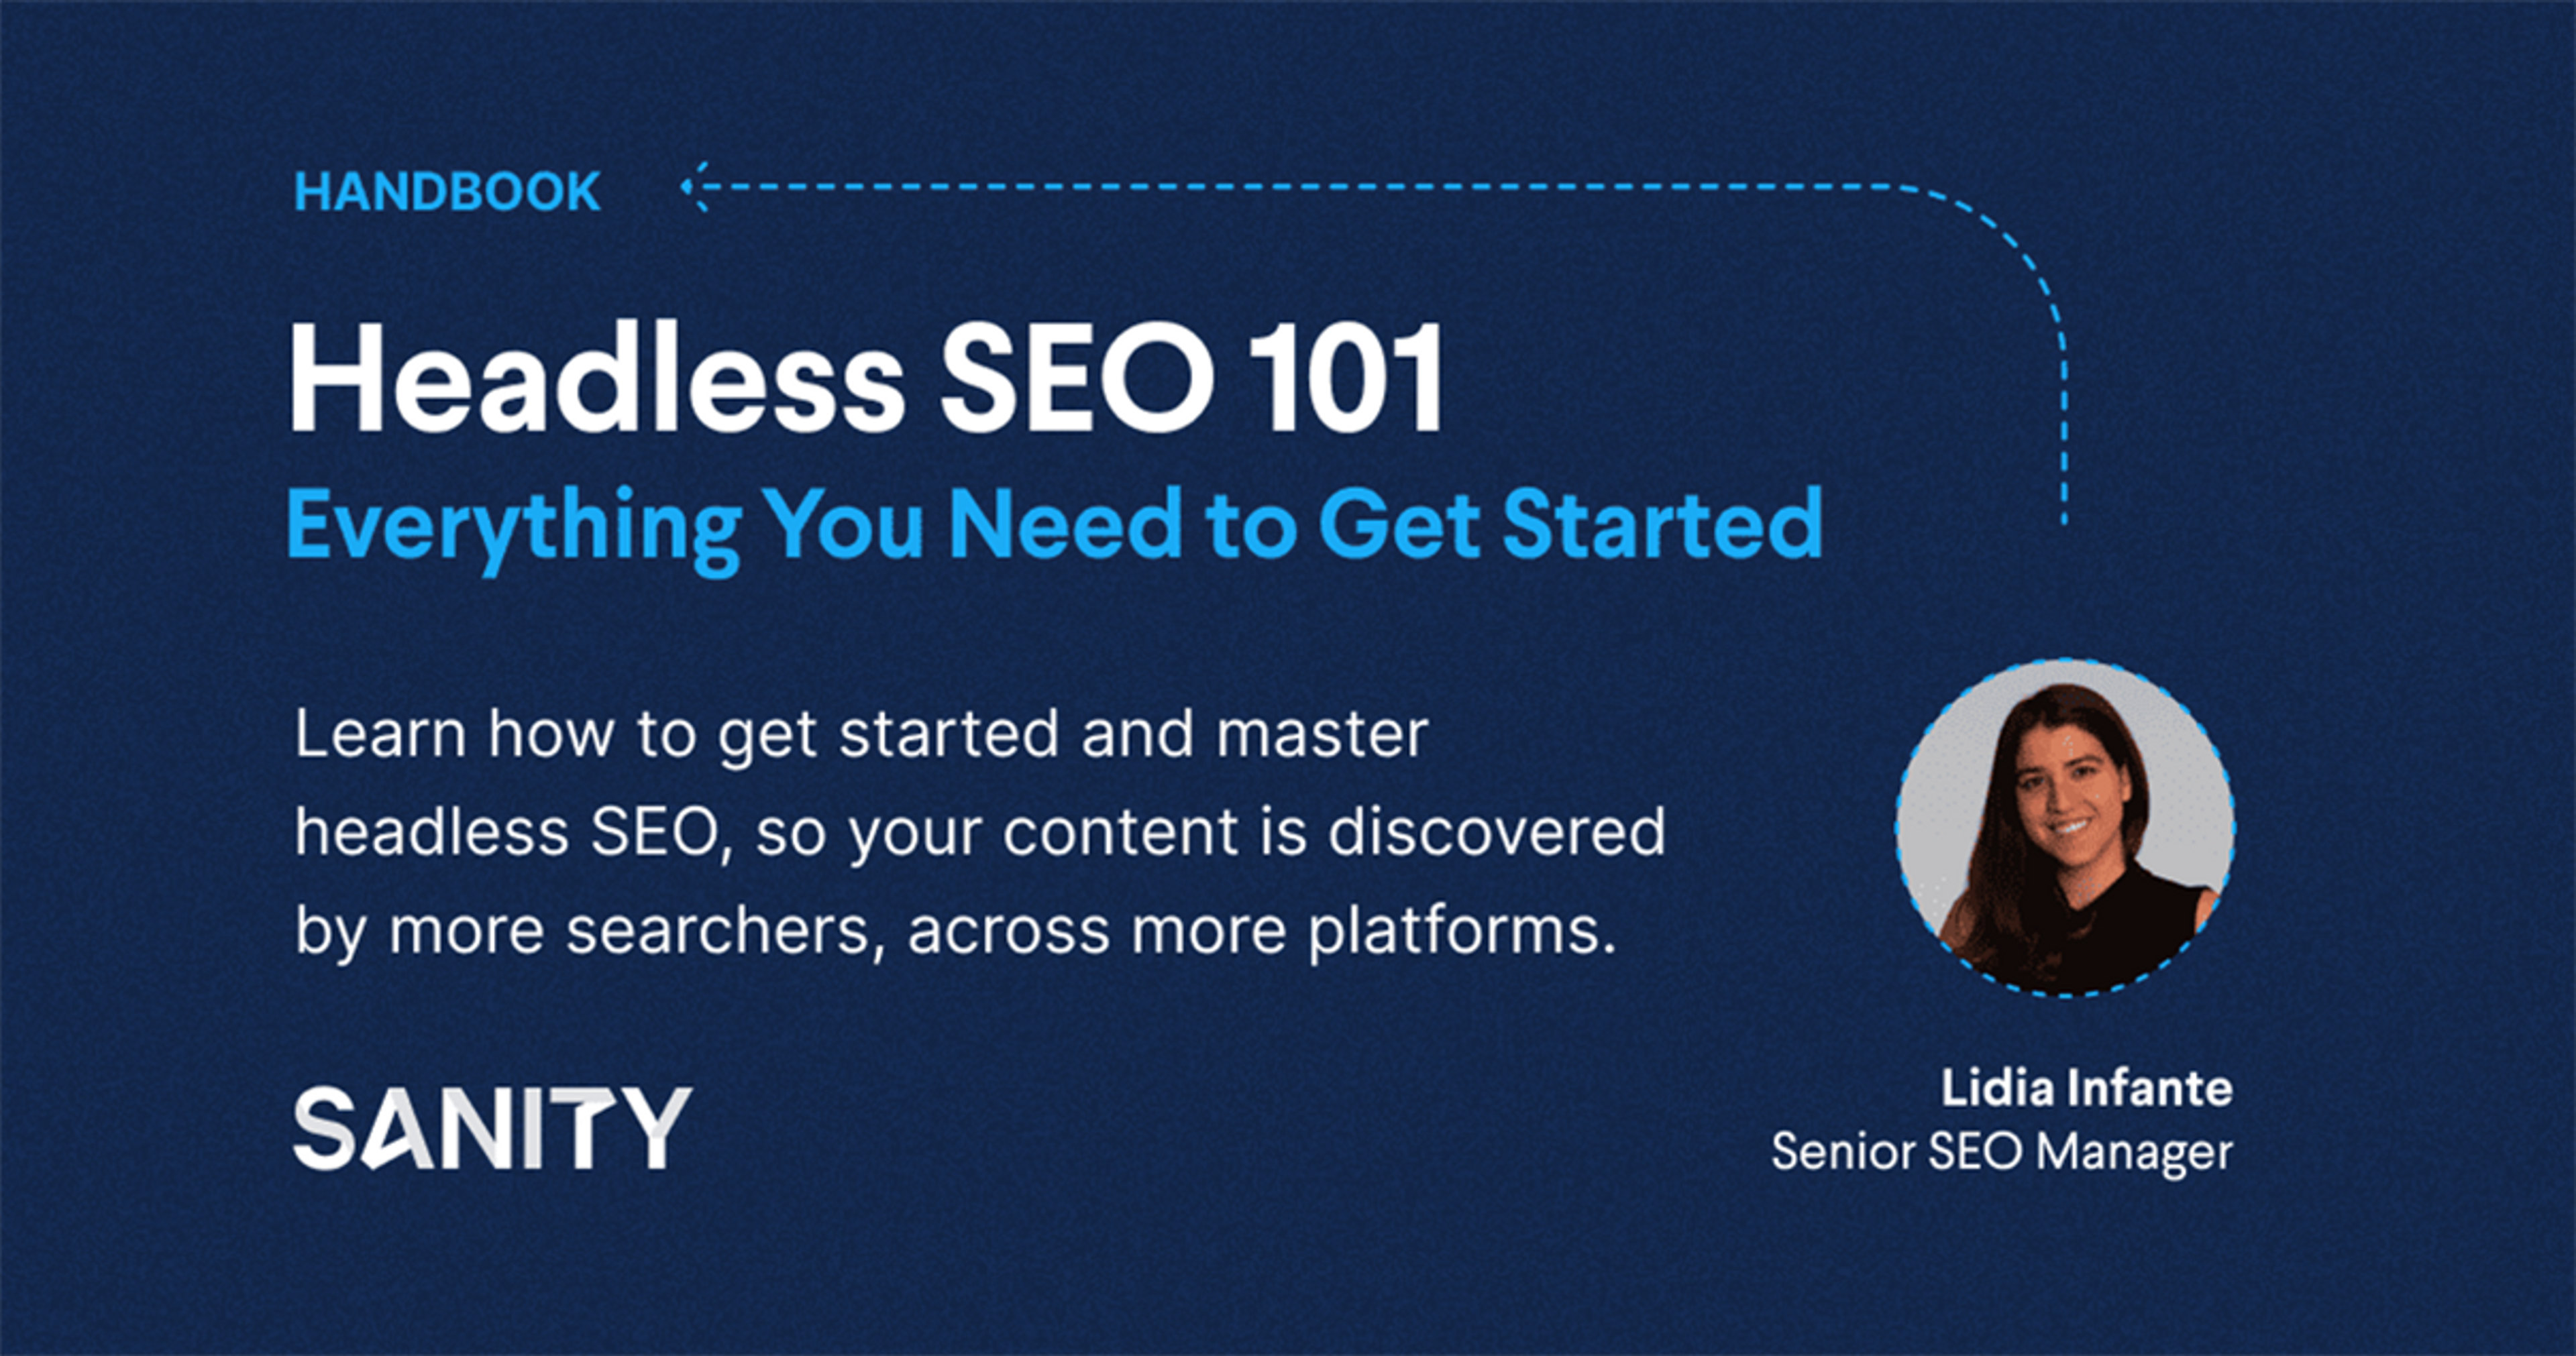 Headless SEO 101: Everything You Need to Get Started